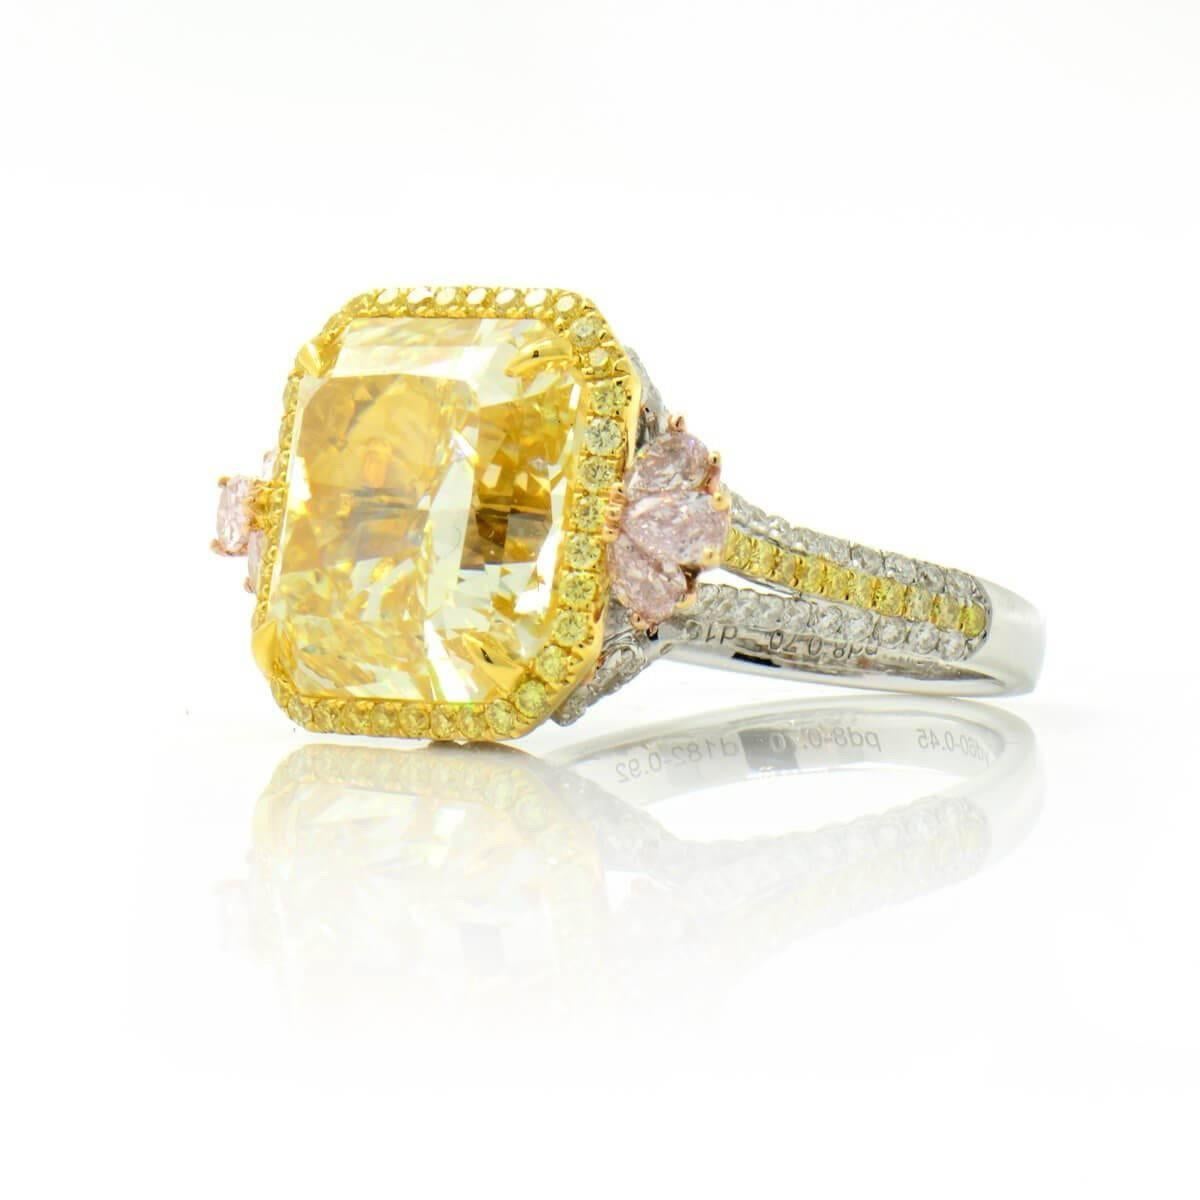  Fancy Yellow and Pink Diamond Ring GIA Certified 1